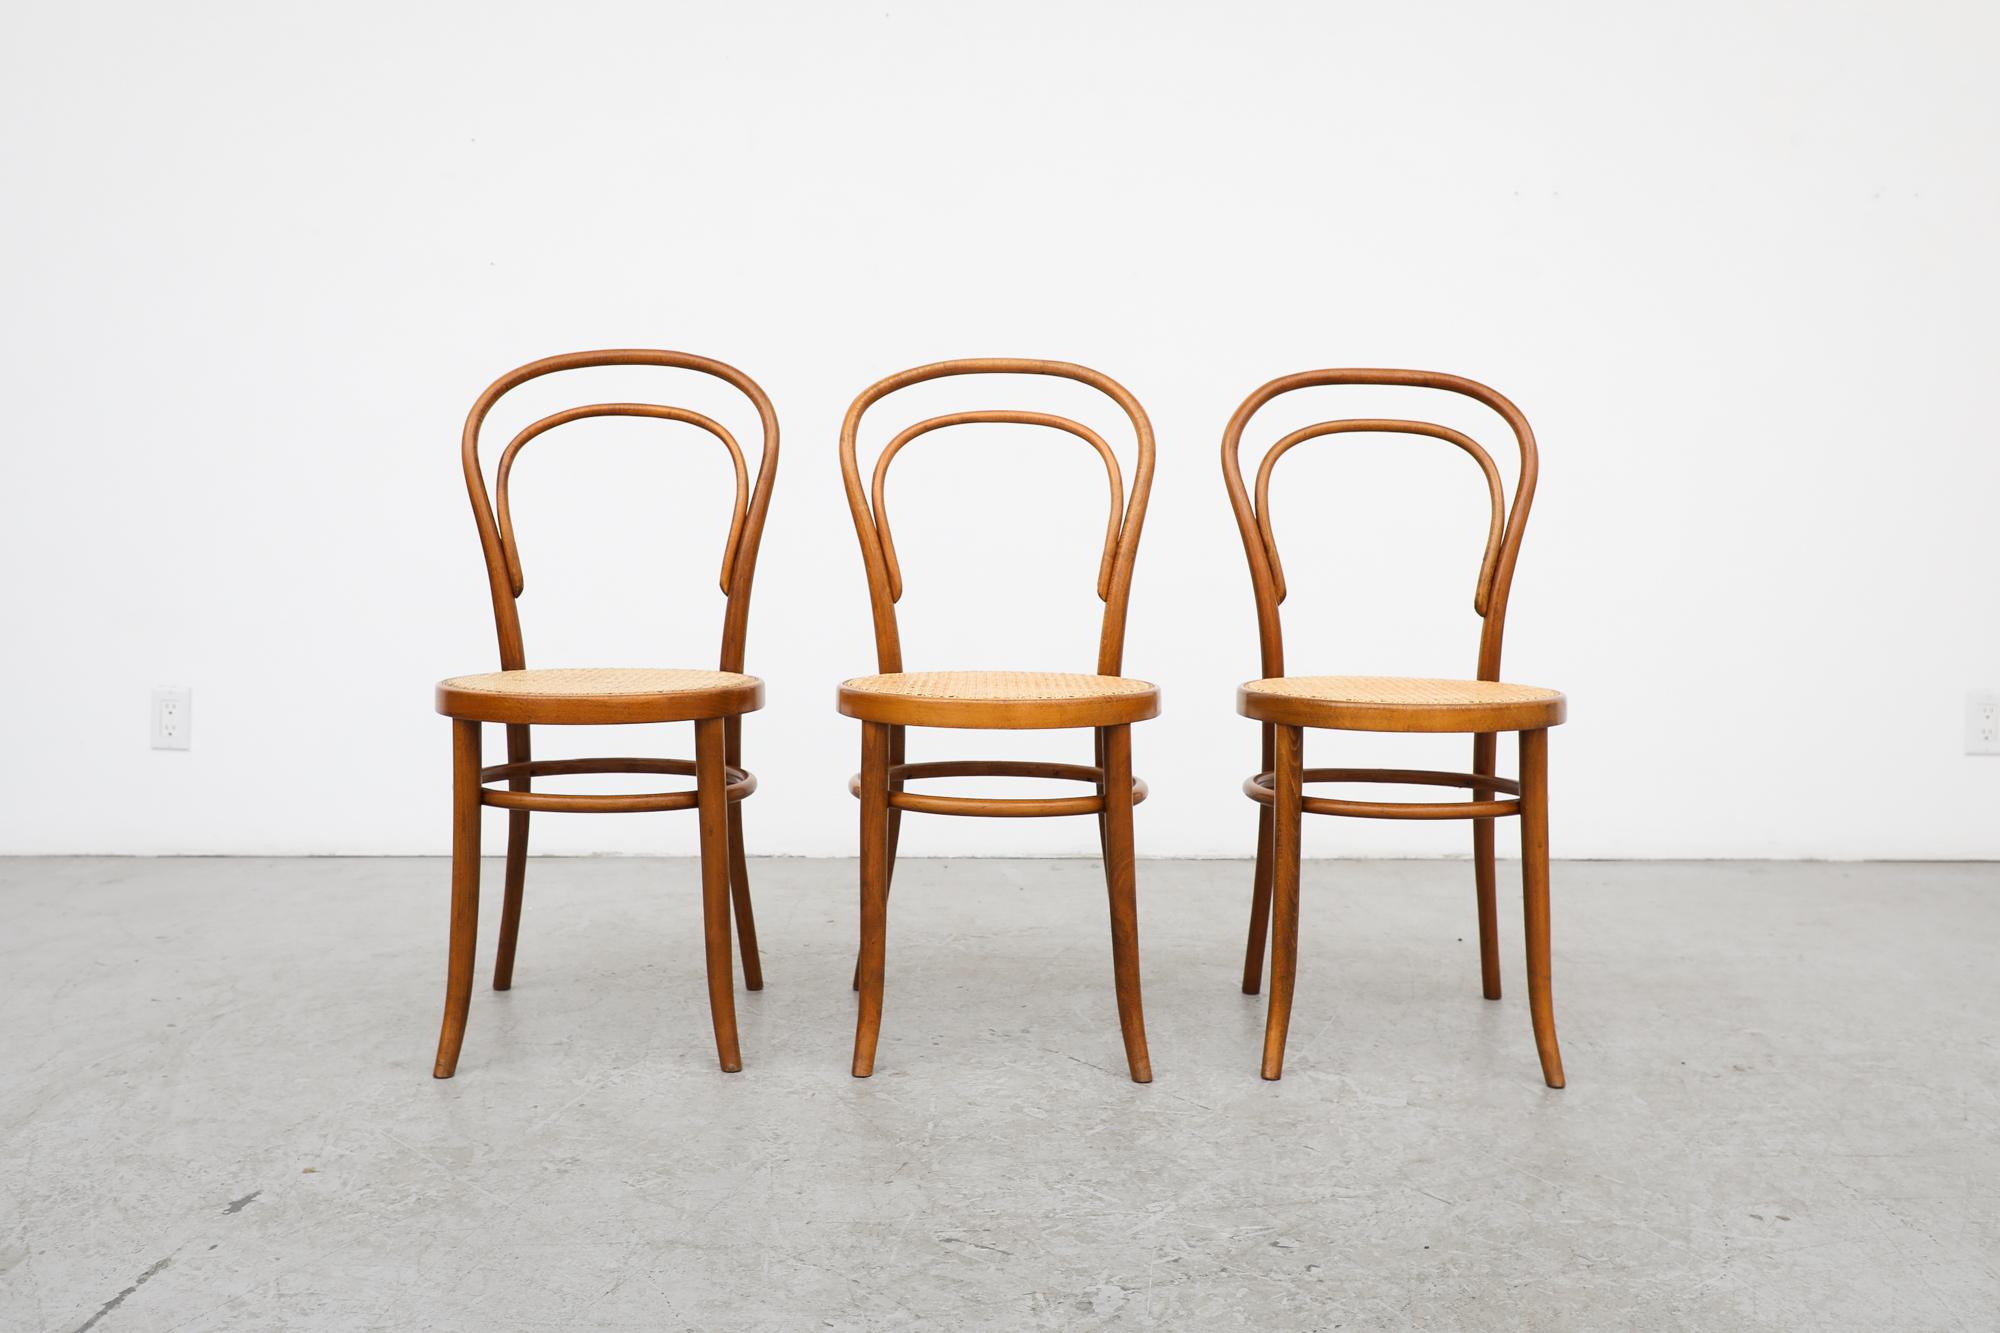 Thonet No. 14 bentwood and cane cafe chairs. In original condition with visible wear consistent with its age and use. Sold individually $550 each.